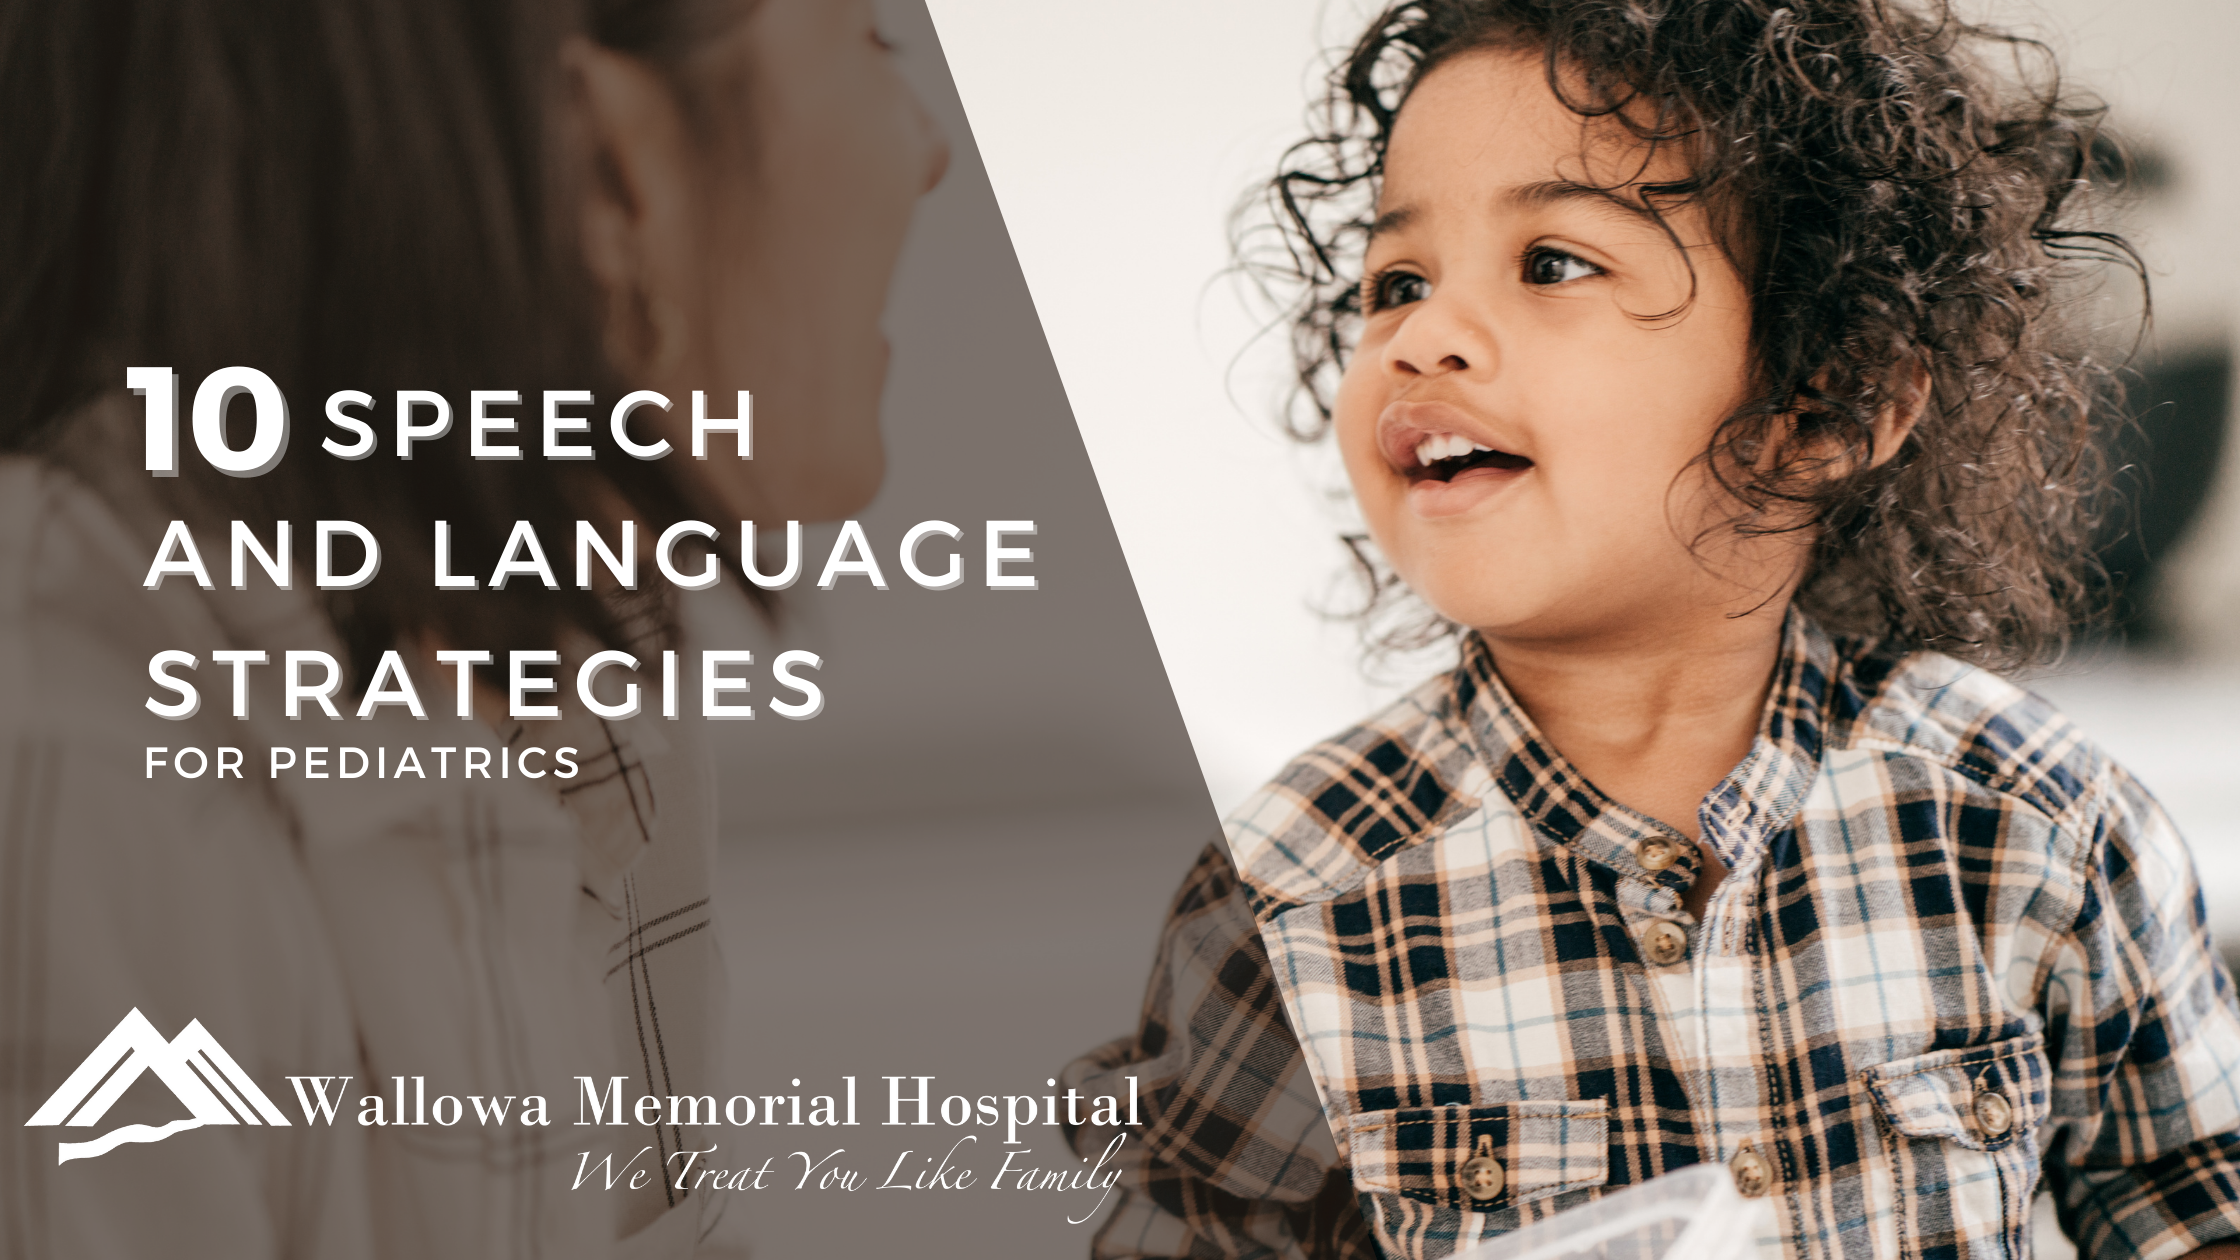 Woman and child speaking to each other. 10 Speech and language strategies for pediatrics, Wallowa Memorial Hosptial, We Treat Your Like Family.